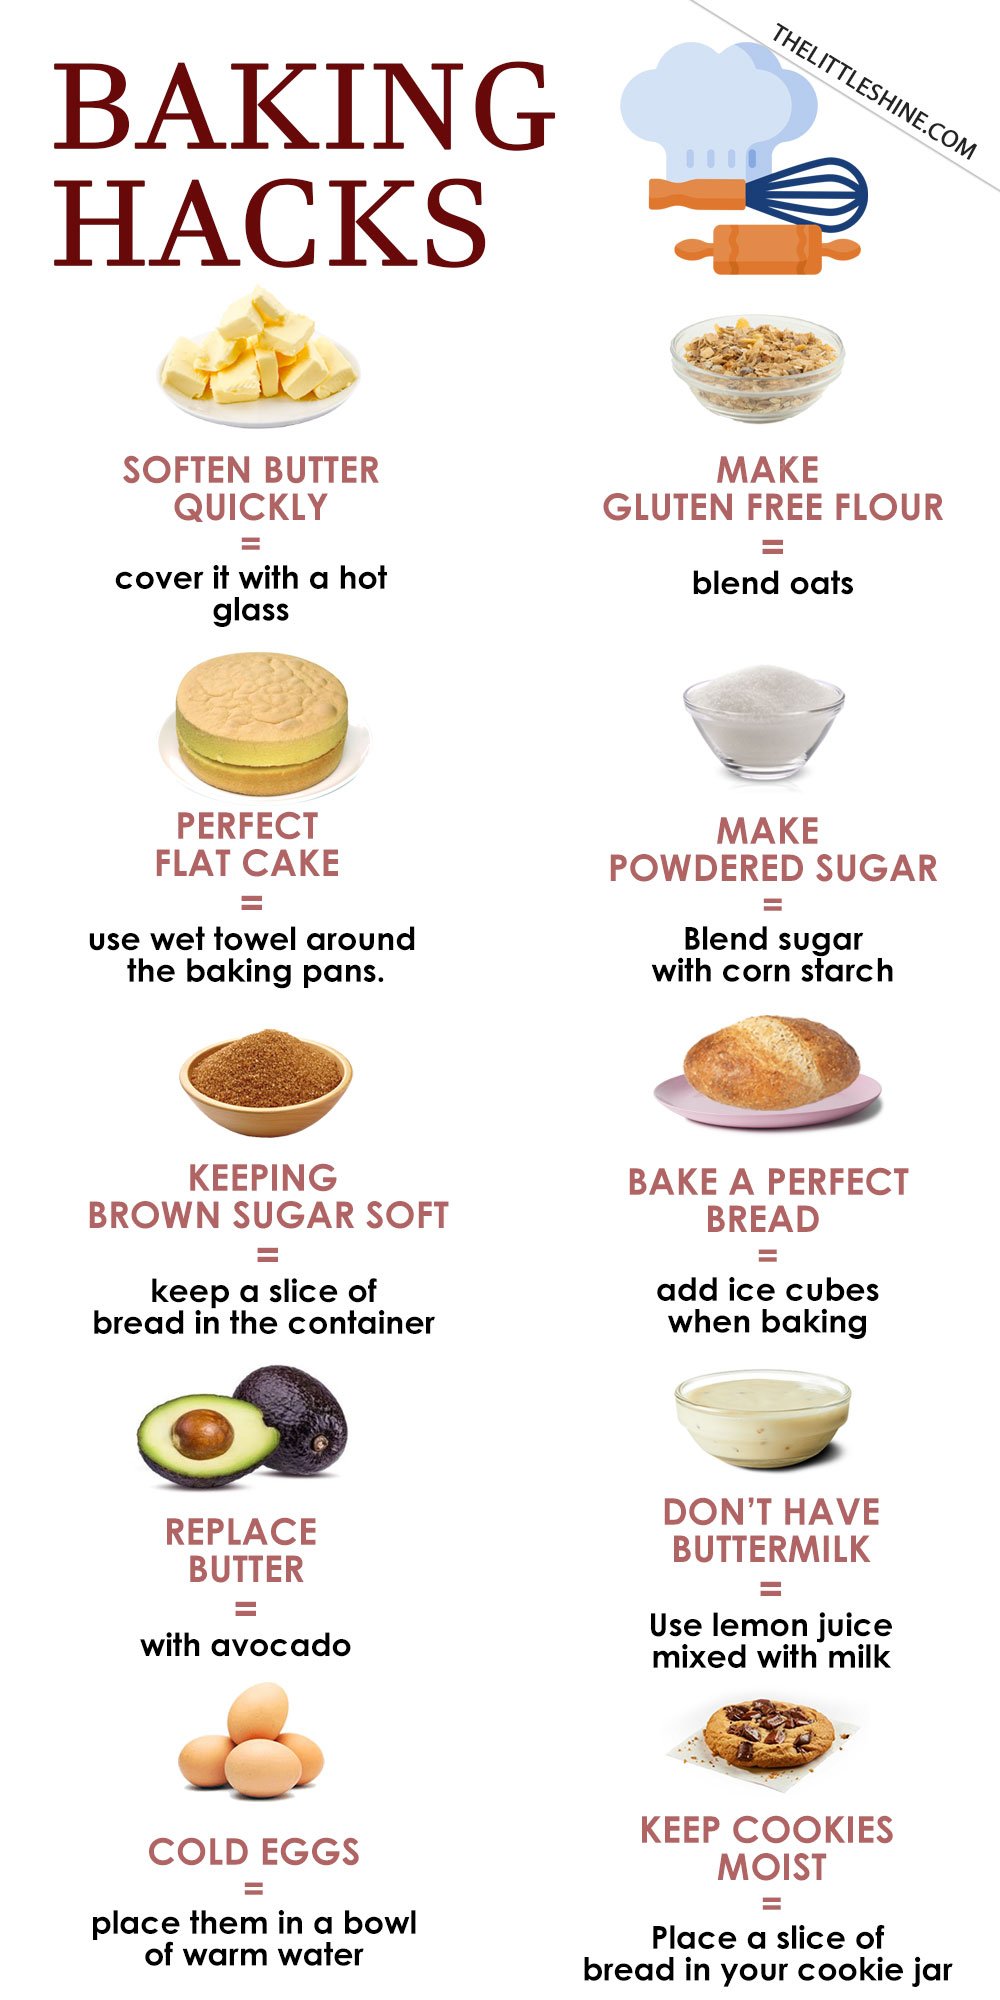 PART 2 – Best baking tips and hacks to make life easier